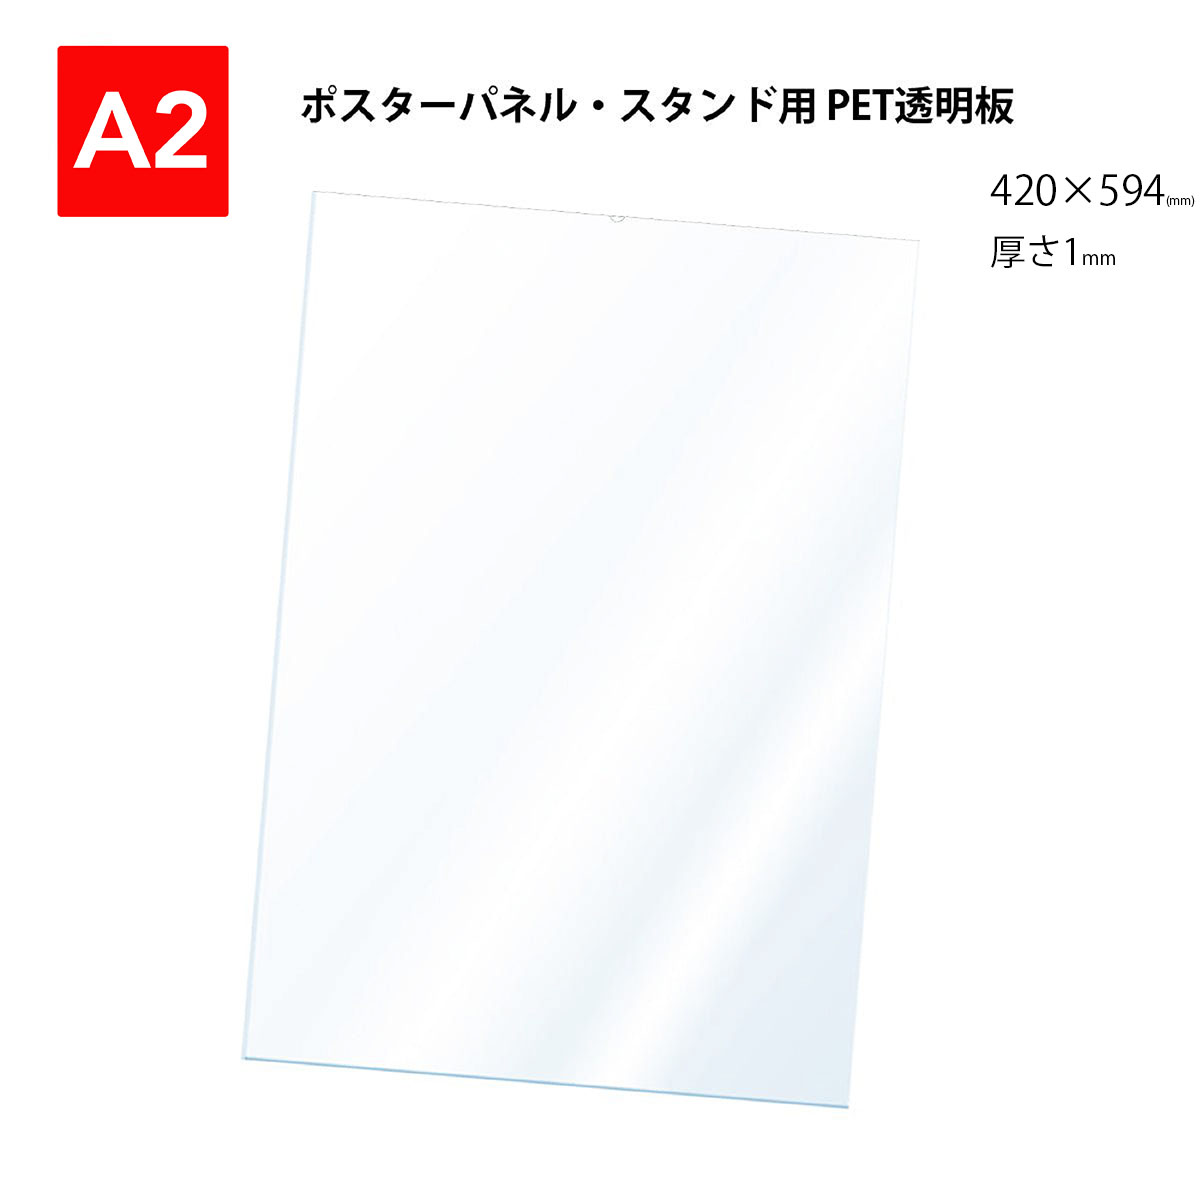 PET transparent board (A2) poster panel * stand for protection seat (1 sheets insertion ) ( company name * store name etc.. juridical person name, group name is cash on delivery OK)